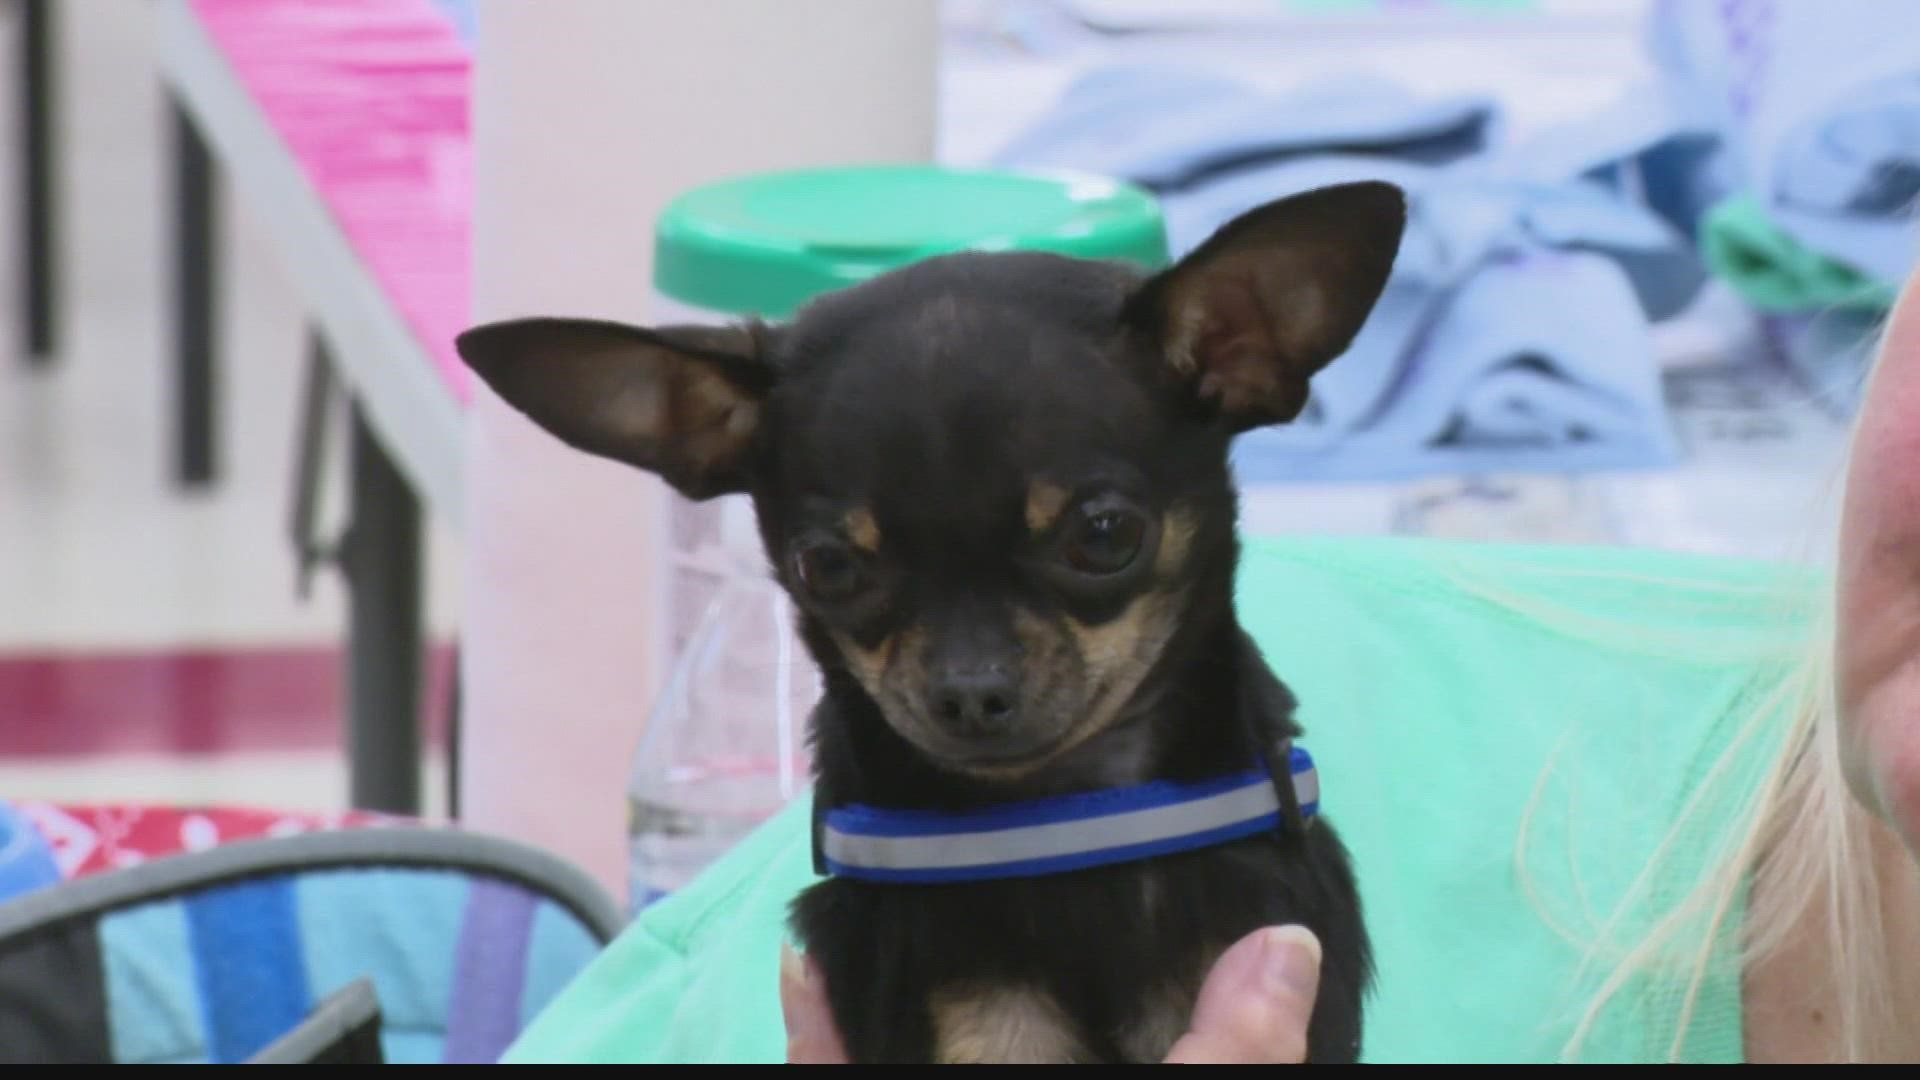 Chihuahua Rescue Indiana hopes to spread the word about the breed so they can prevent over-breeding and a chihuahua ending up in the wrong home.